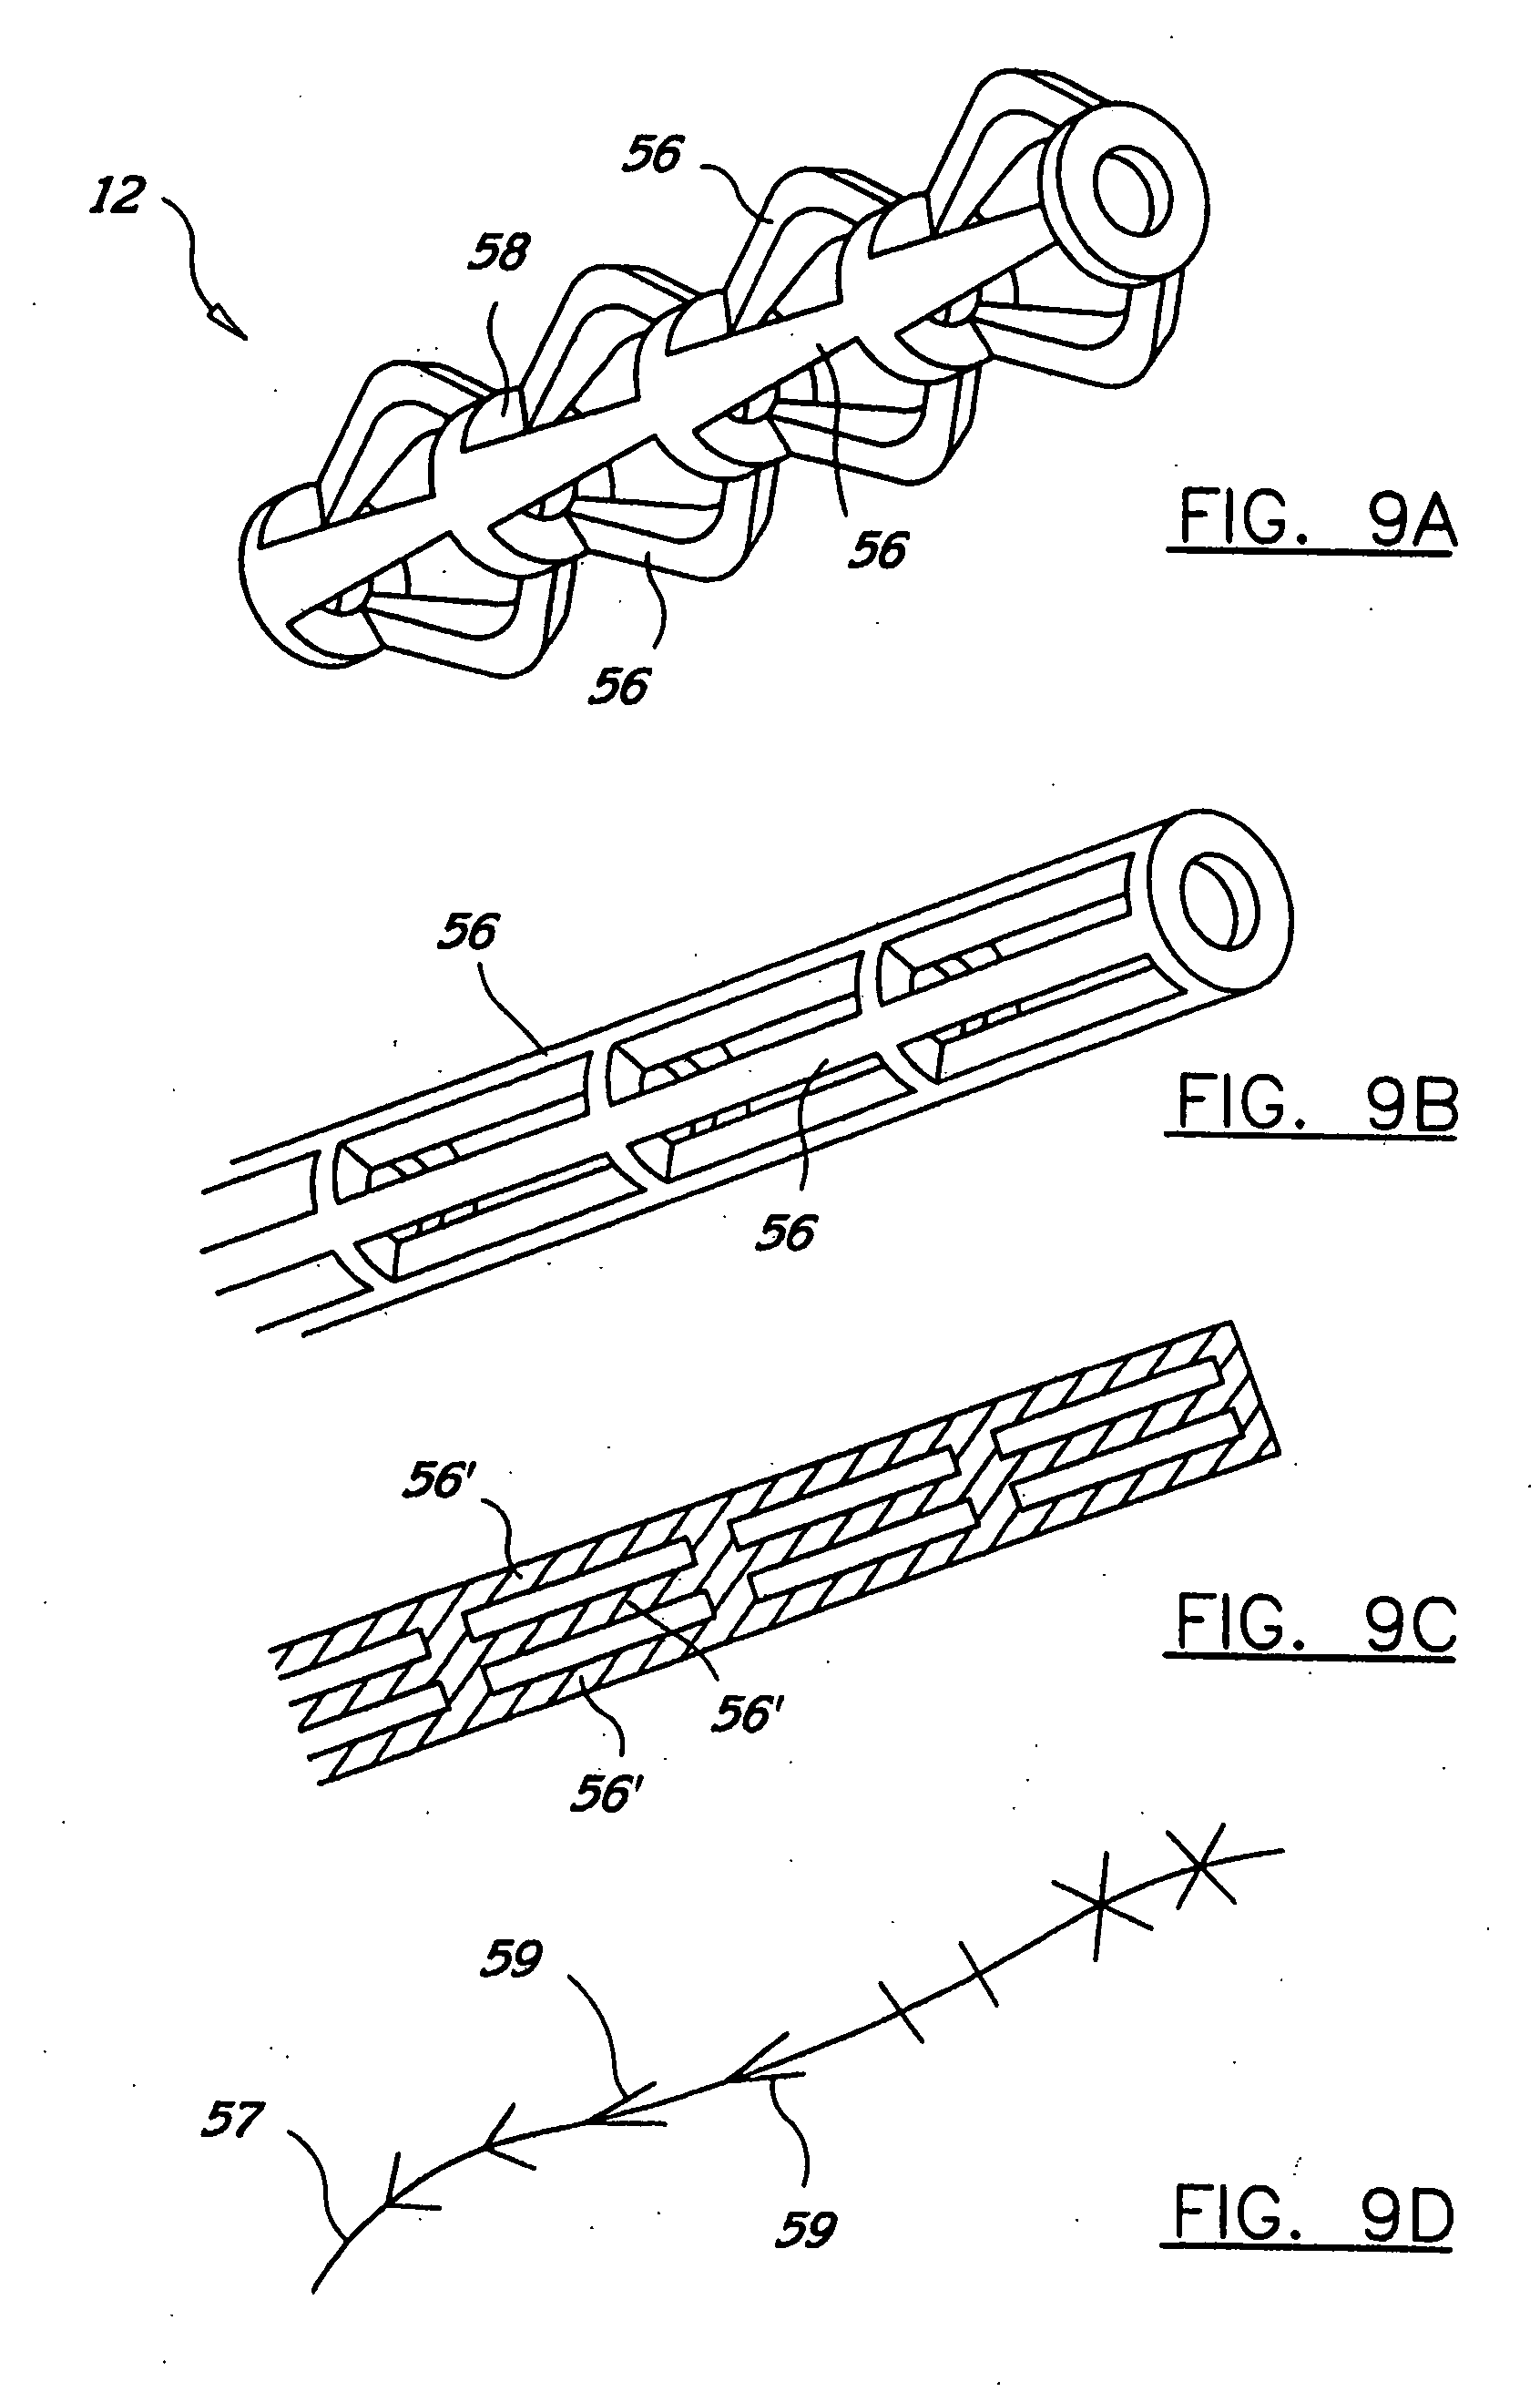 Radially expandable stents